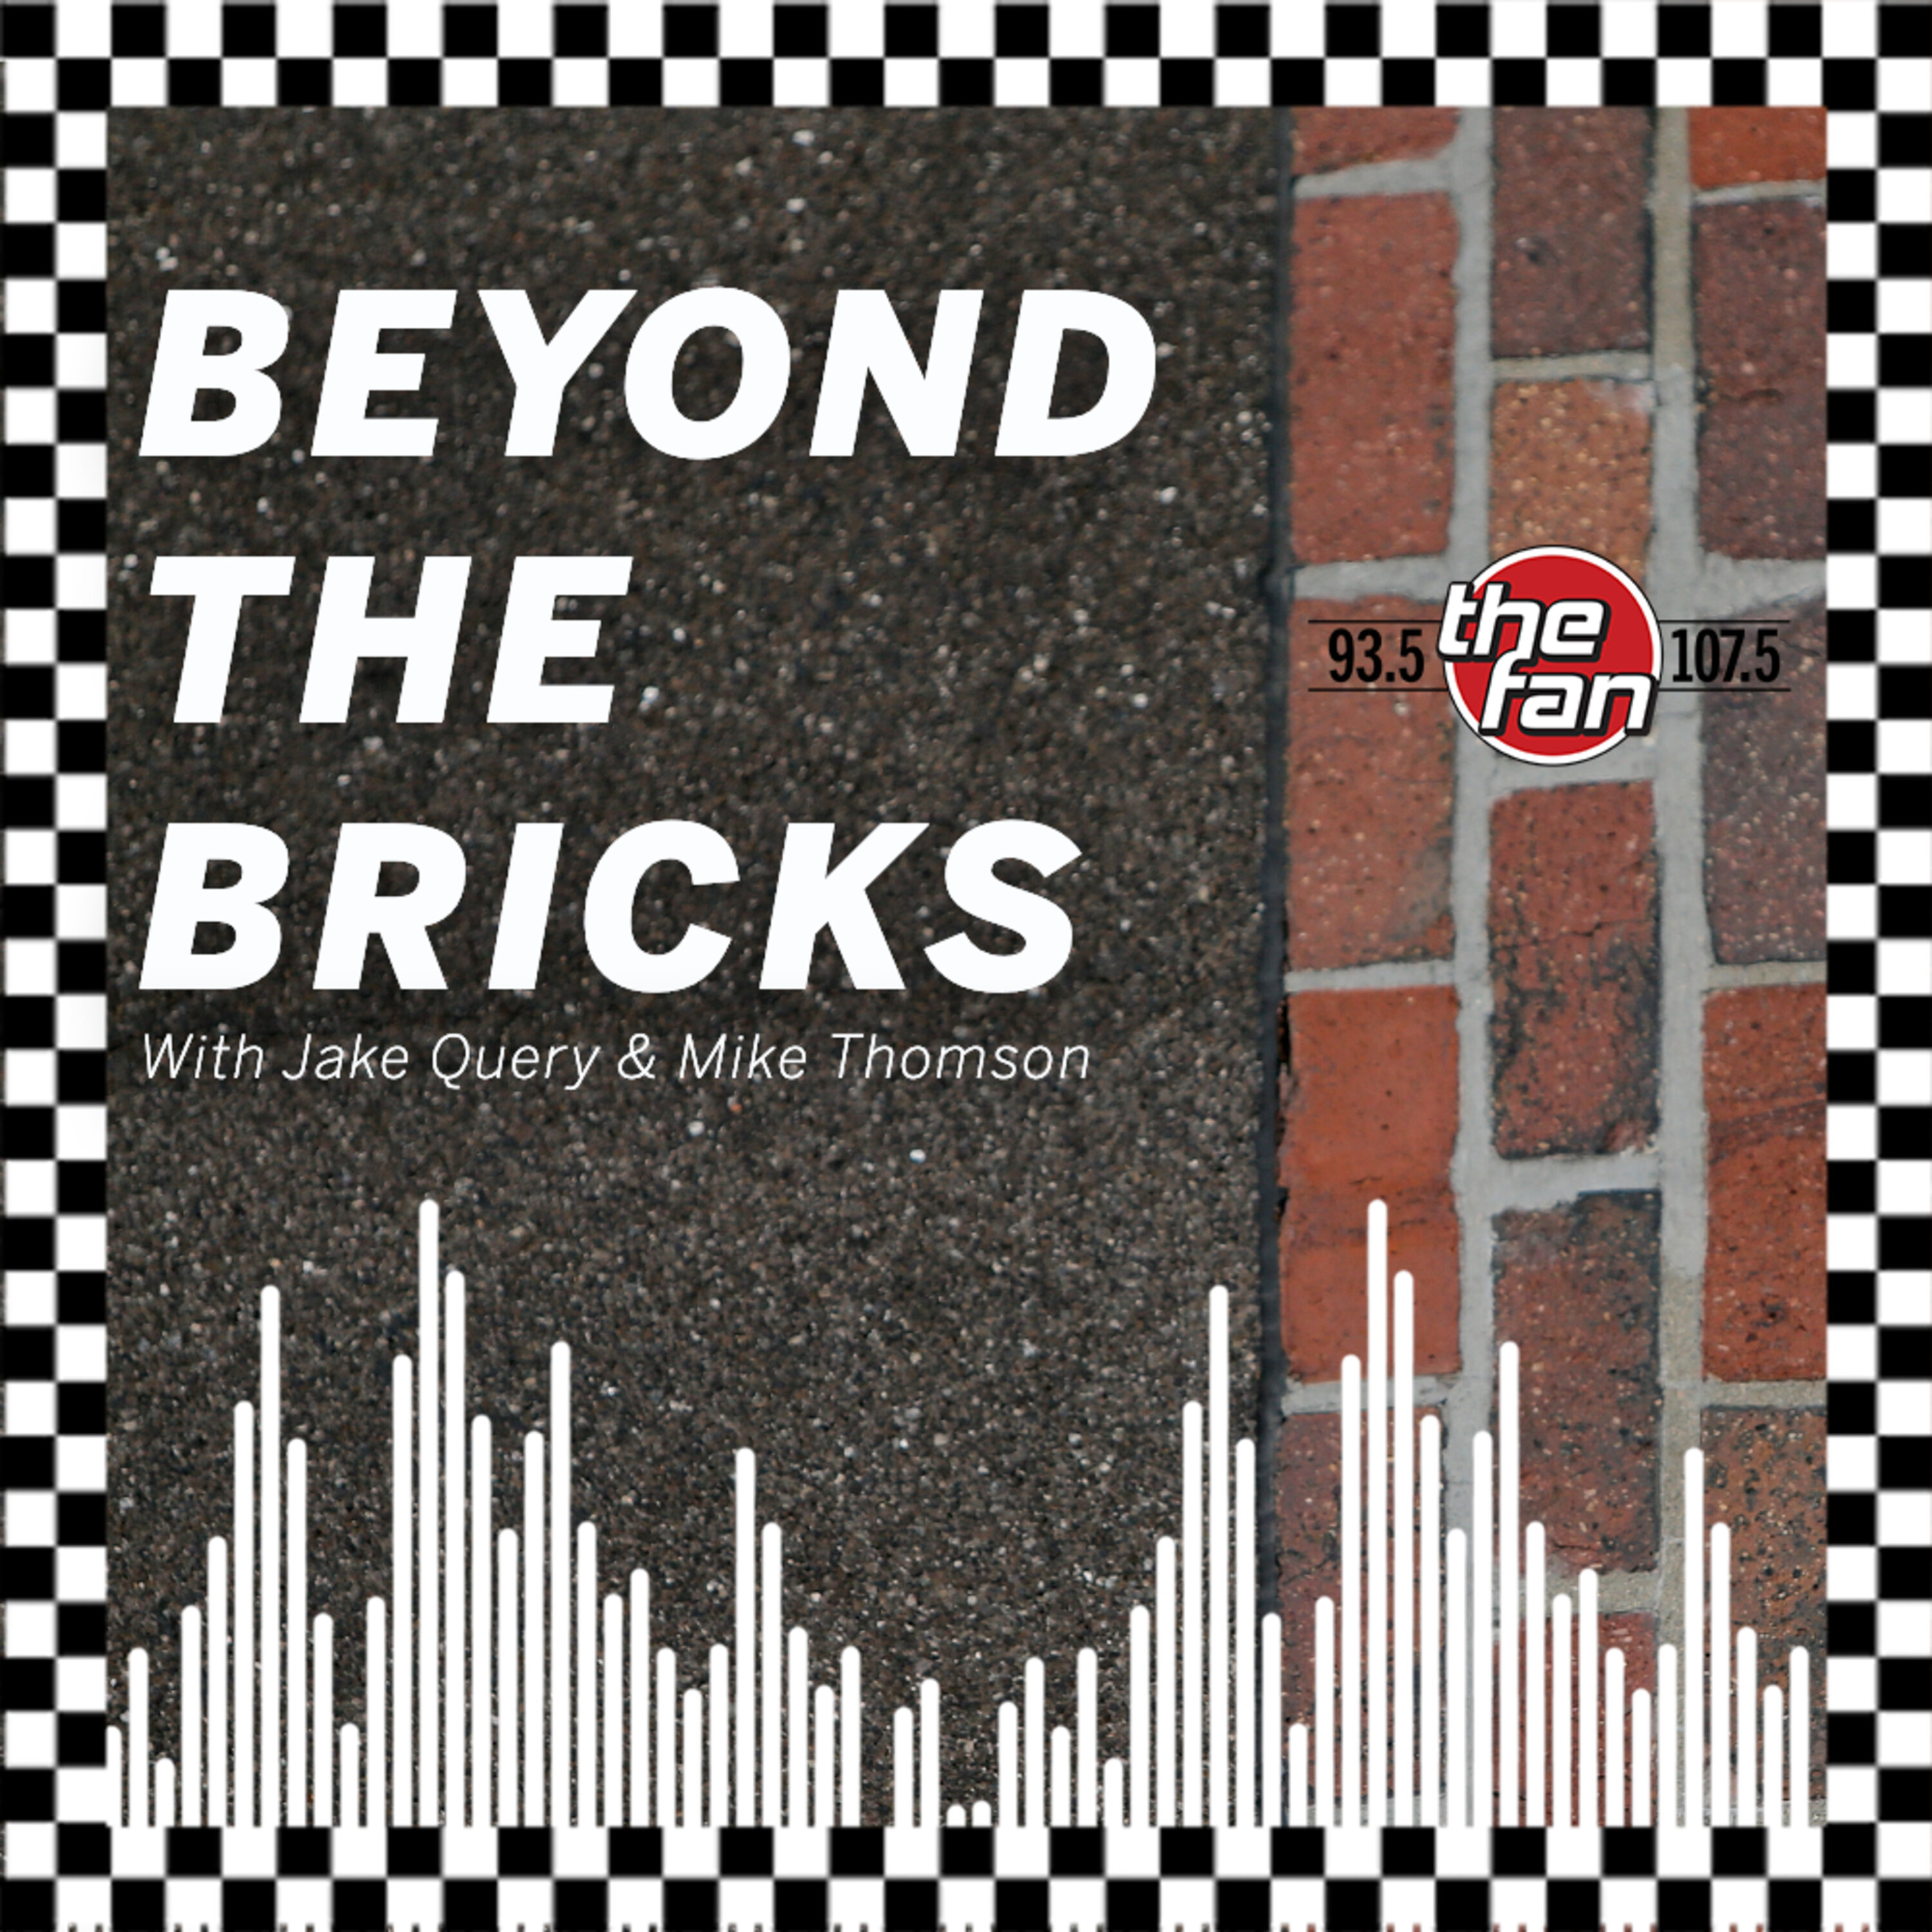 Jake and Mike look back at the first Brickyard 400 in 1994